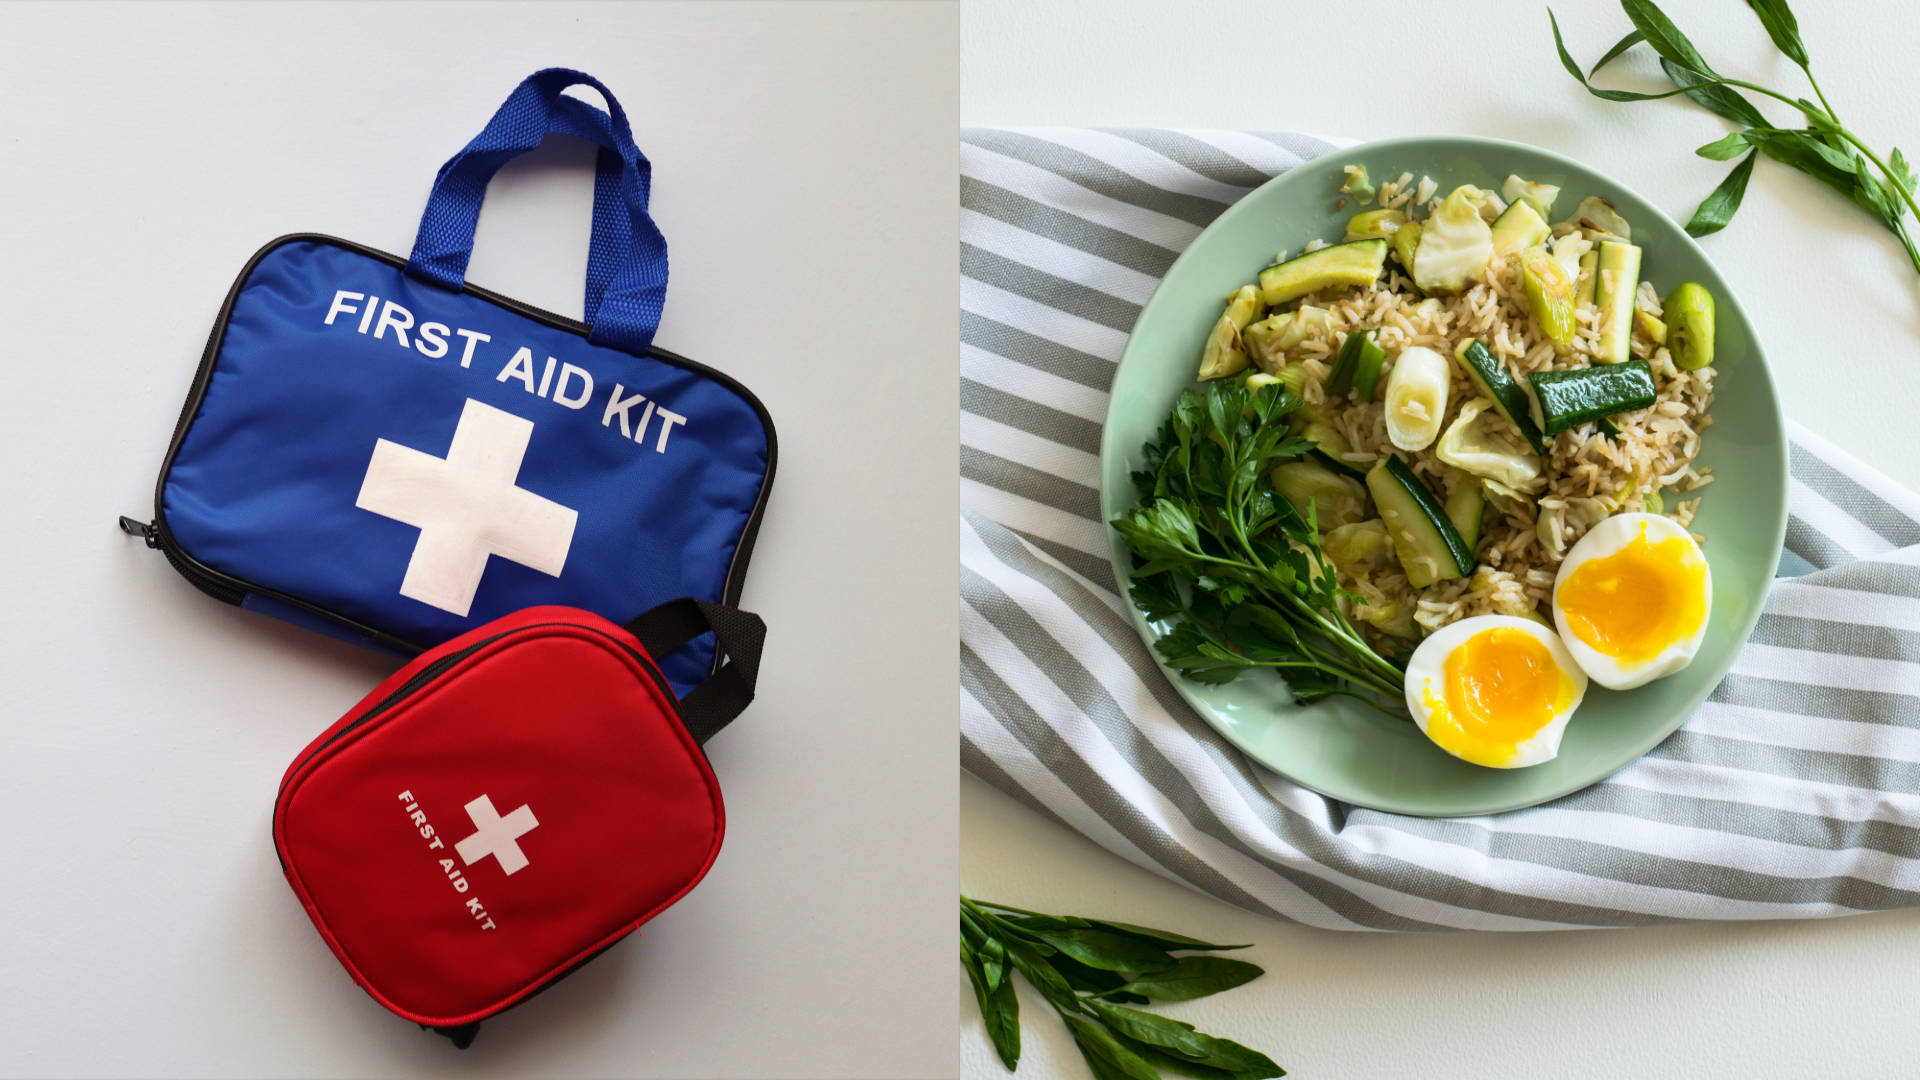 Blue and red first aid bags and a plate of rice, zucchini and hard boiled egg.